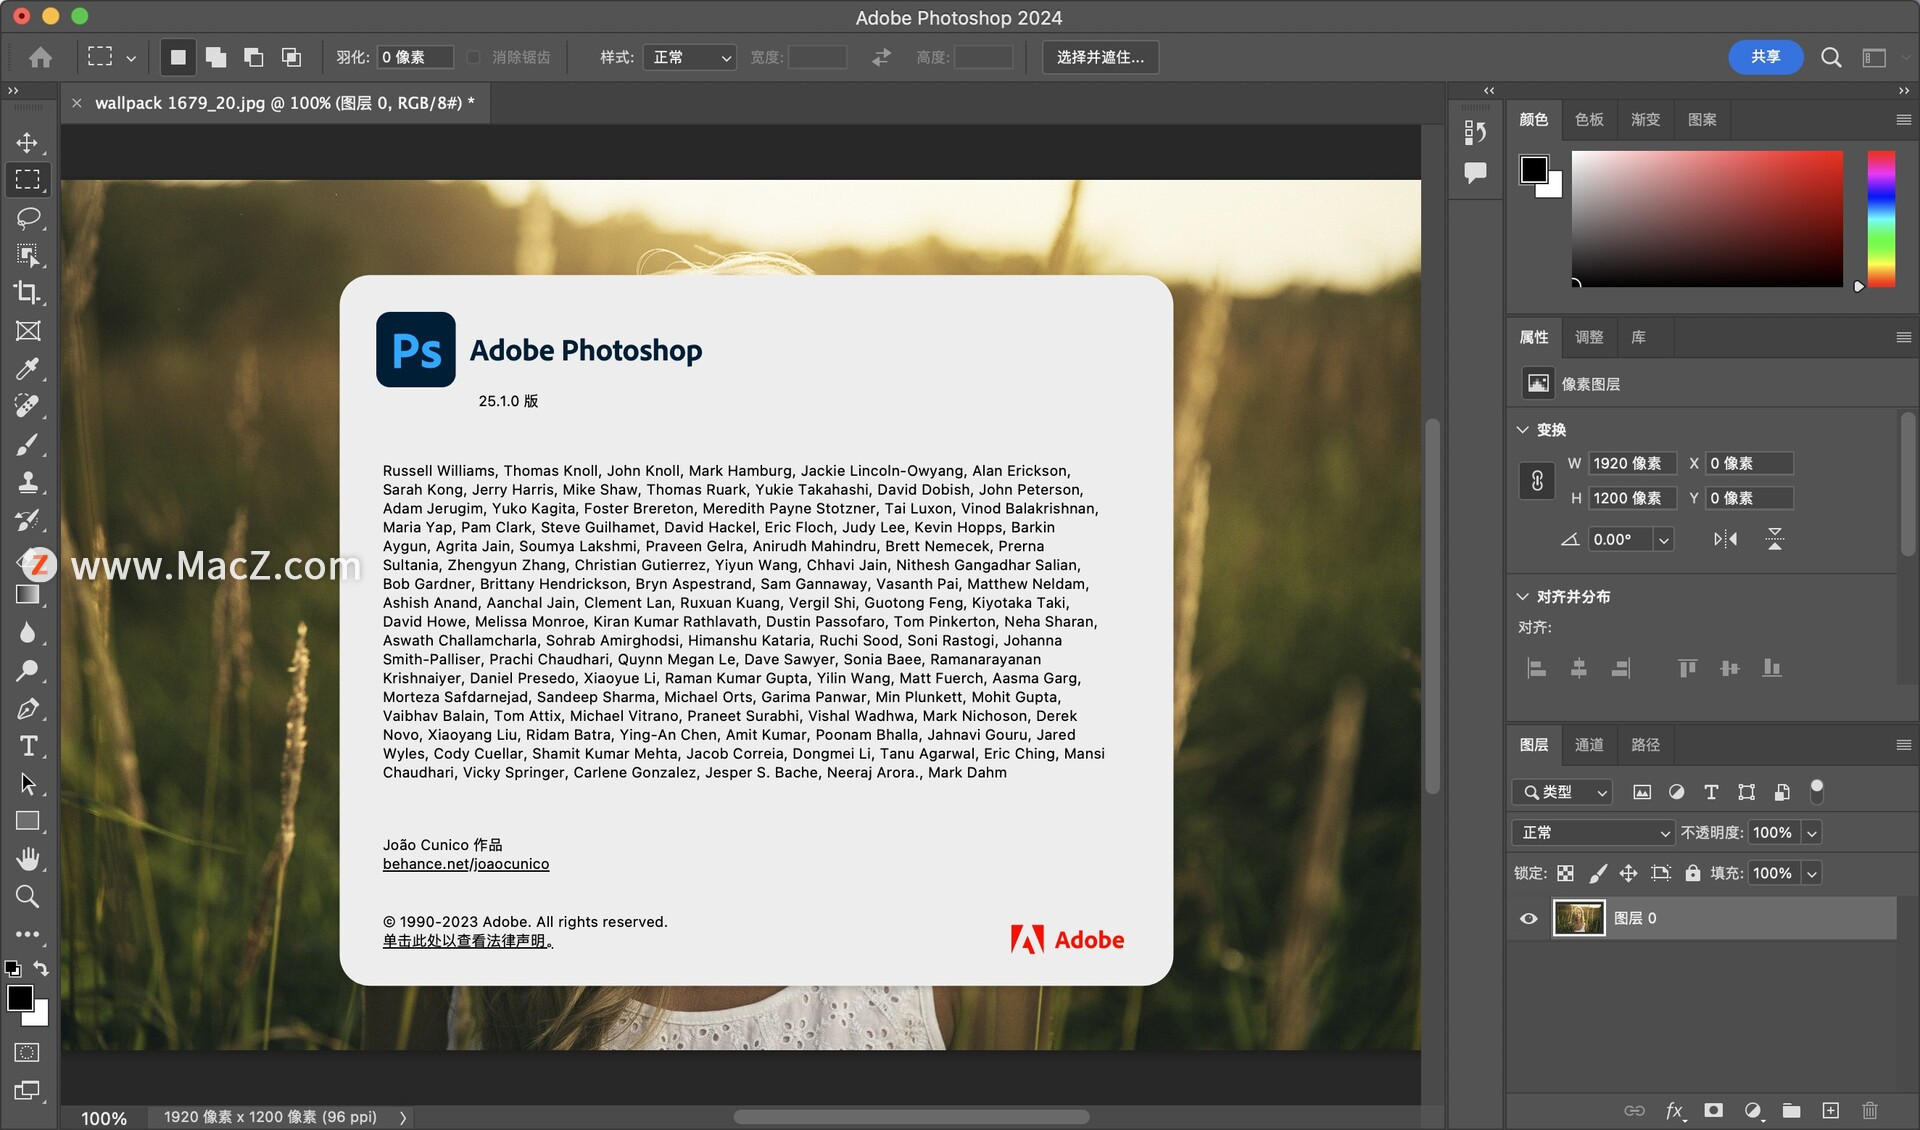 Photoshop 2024 (ps) for Mac v25.1正式版